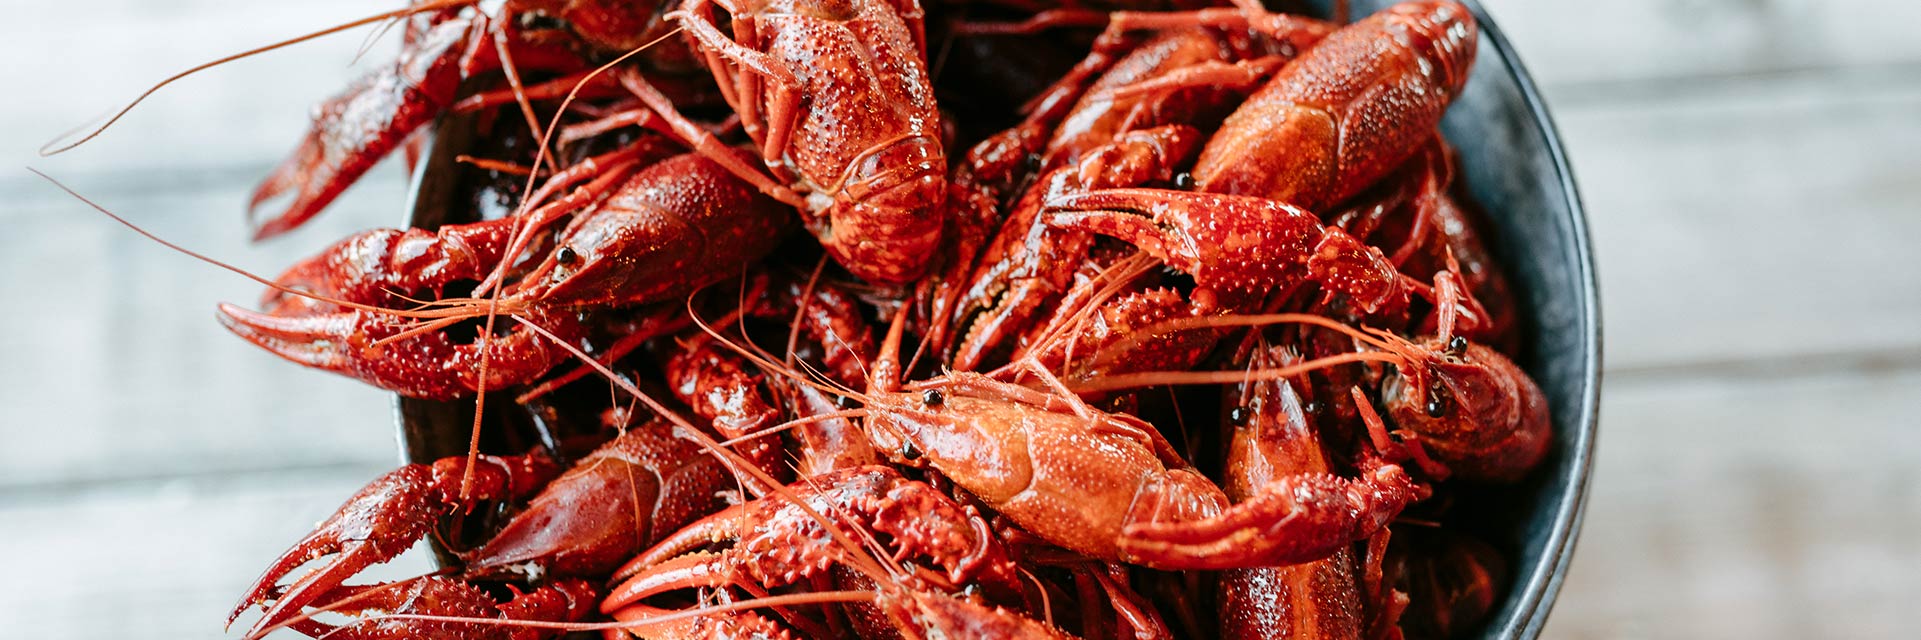 Mouth-watering crawfish catering options from Eat My Catfish, perfect for events in Arkansas. Expertly catered dishes featuring succulent crawfish, sure to delight guests at any gathering. Contact us today to experience the best catering services in Arkansas with Eat My Catfish!